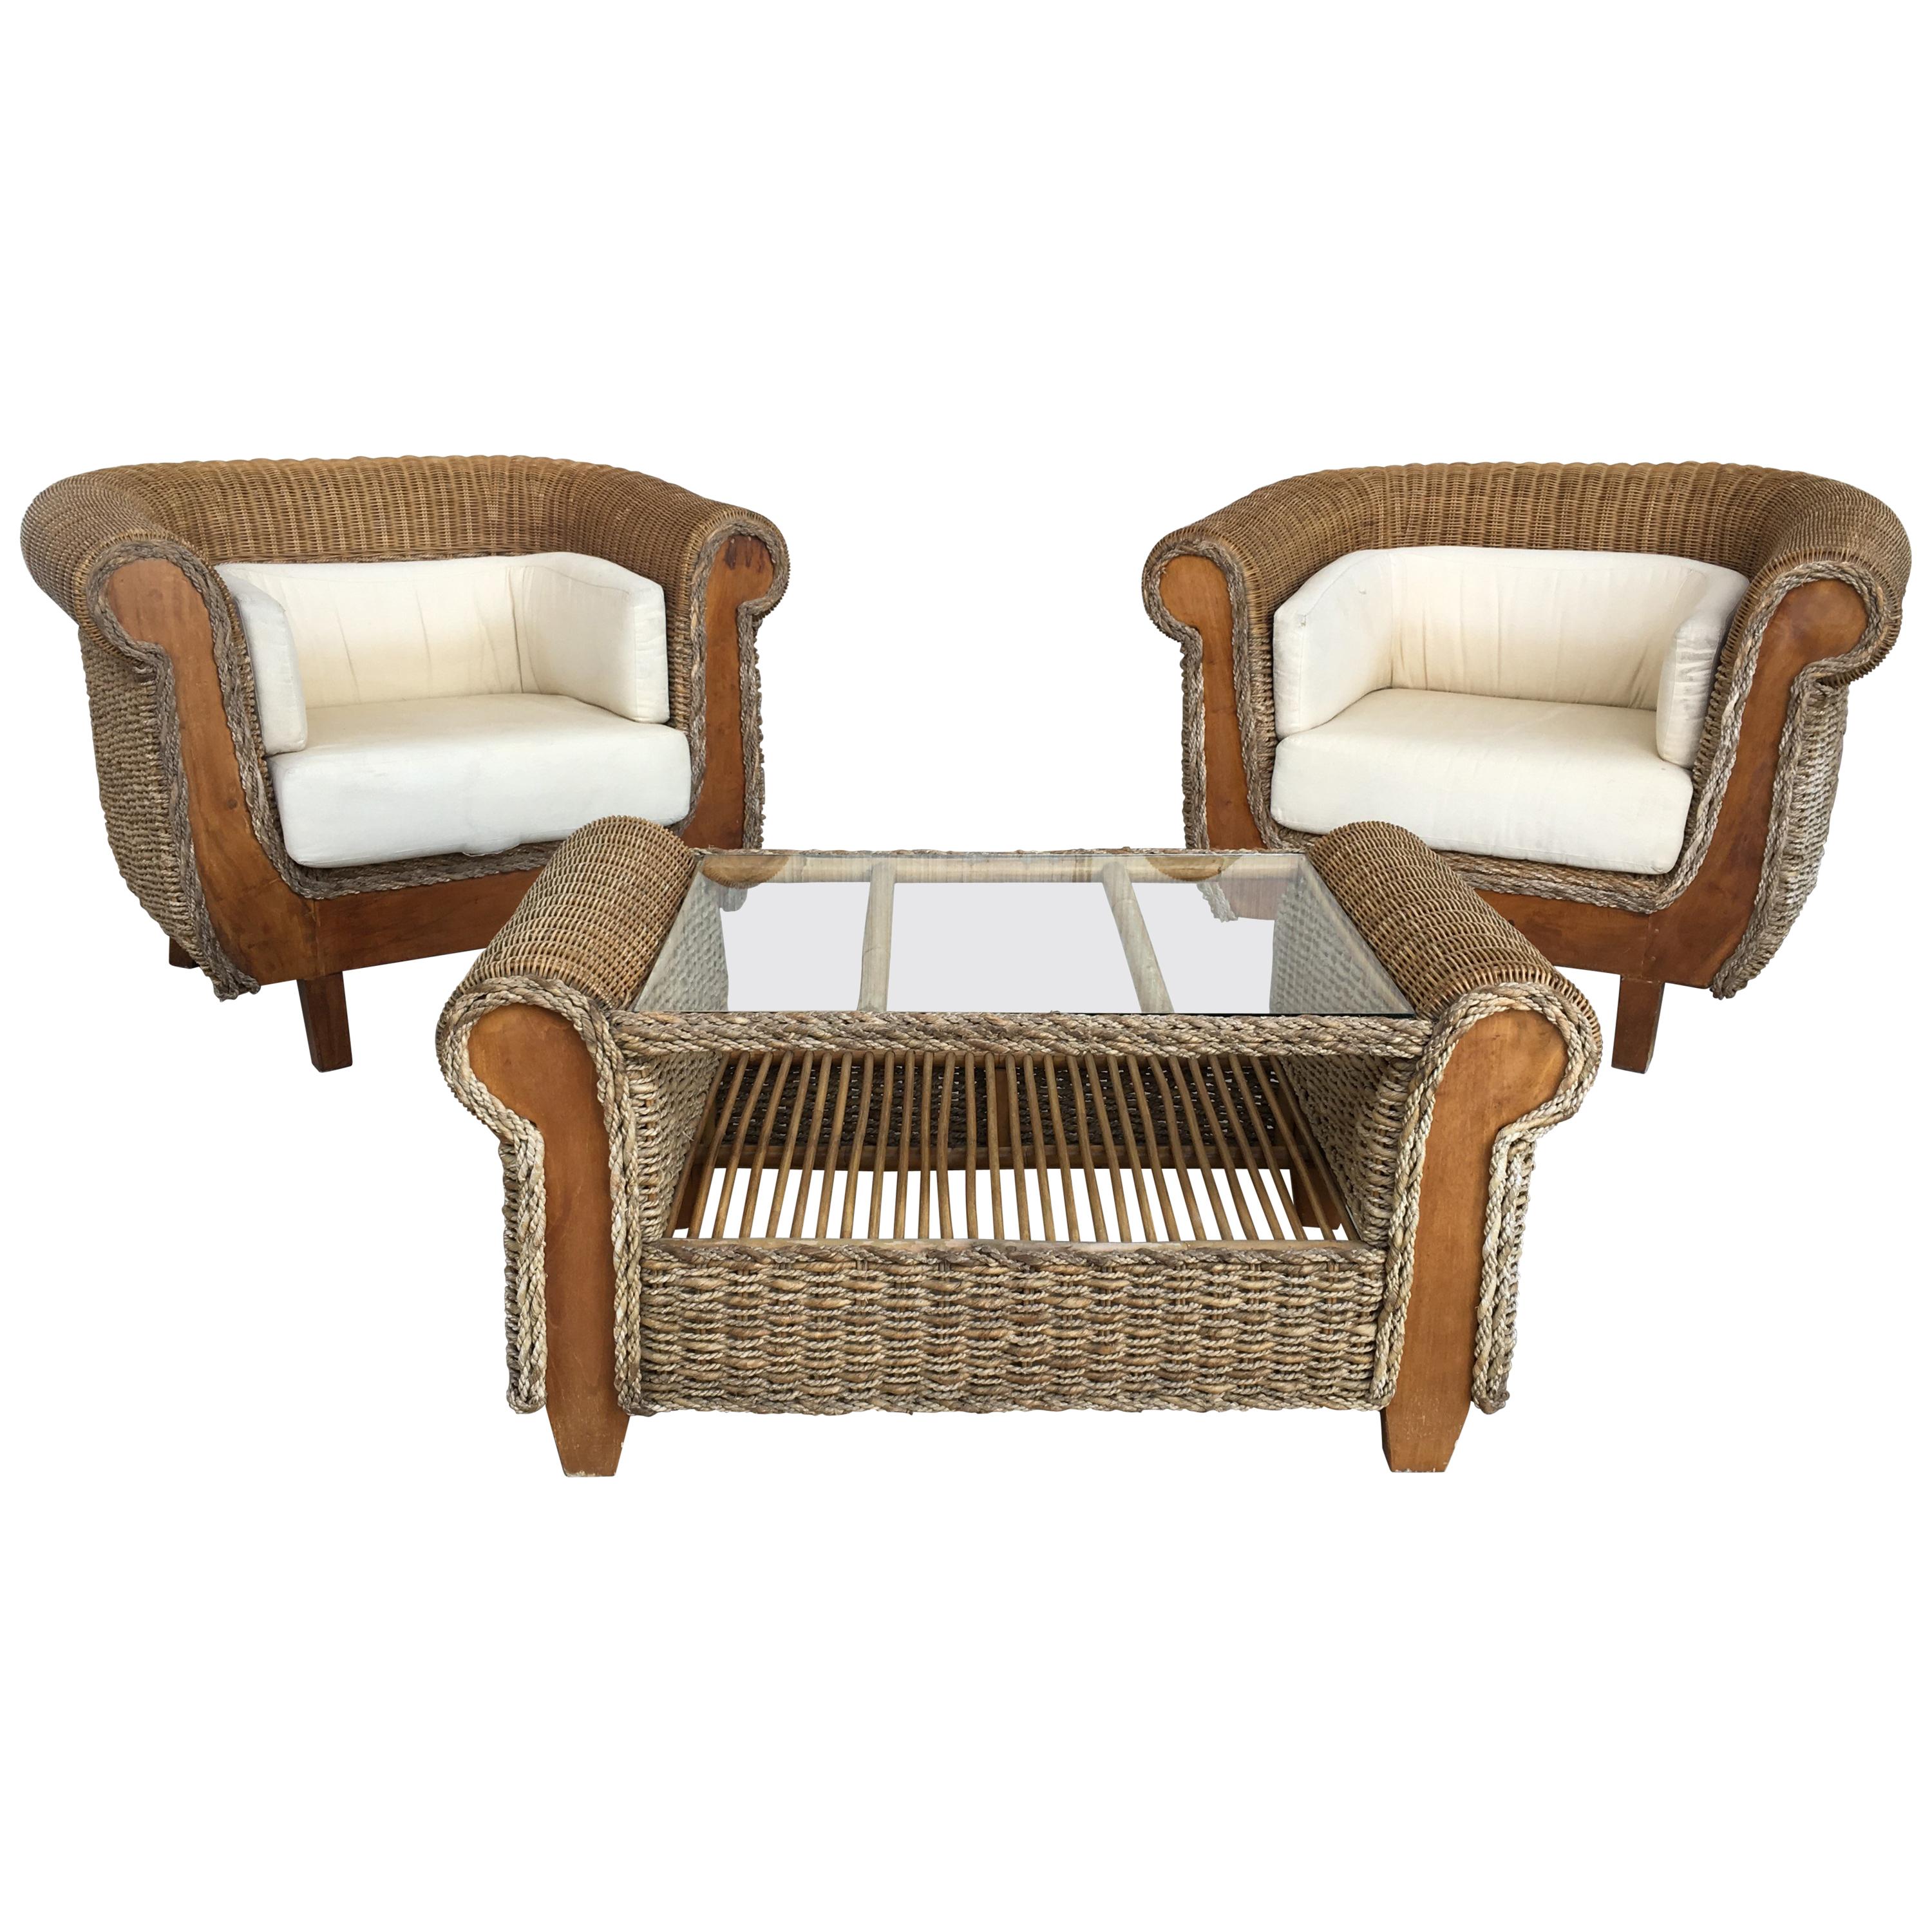 Midcentury Set of Big Armchairs with Matching Coffee Table, Rattan and Wood